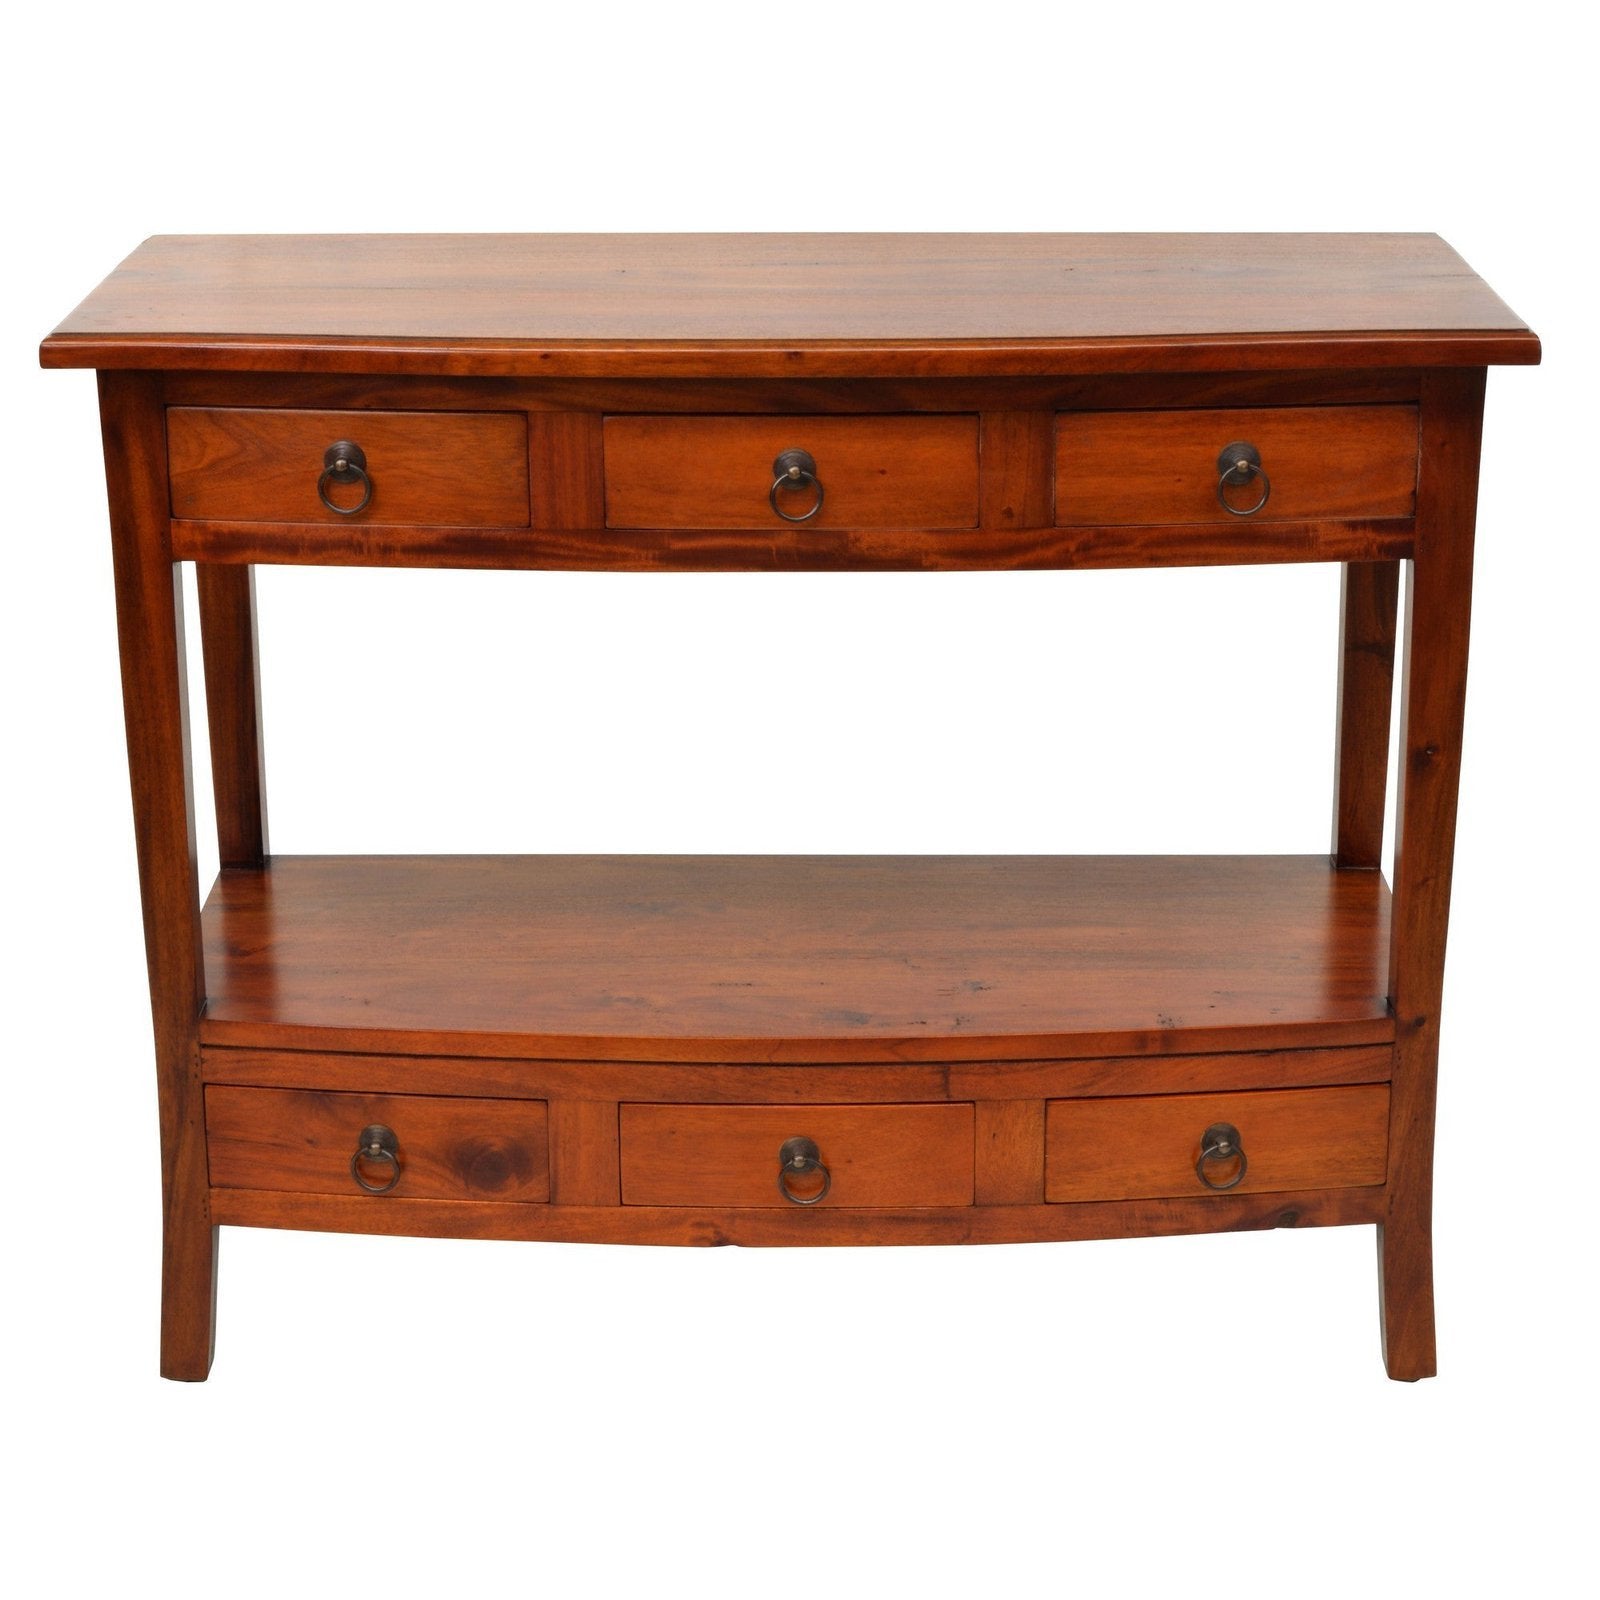 Pacific Console Table